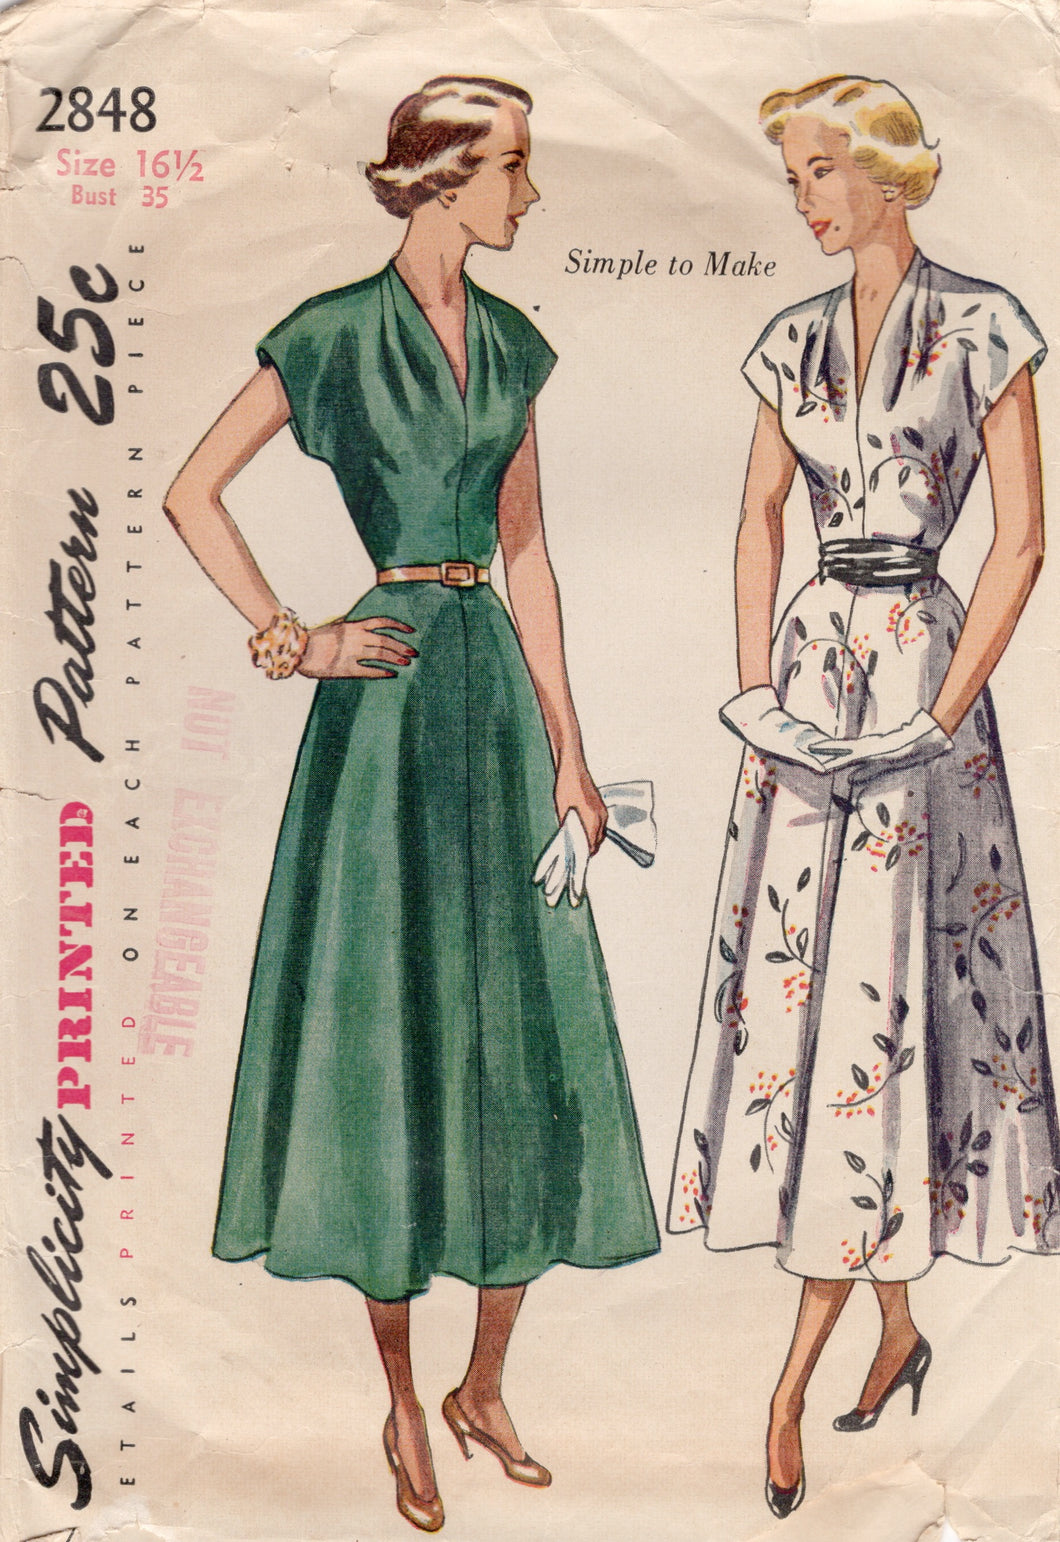 1940's Simplicity One Piece Dress Pattern with Tucked Shoulders and A-line Skirt - Bust 35